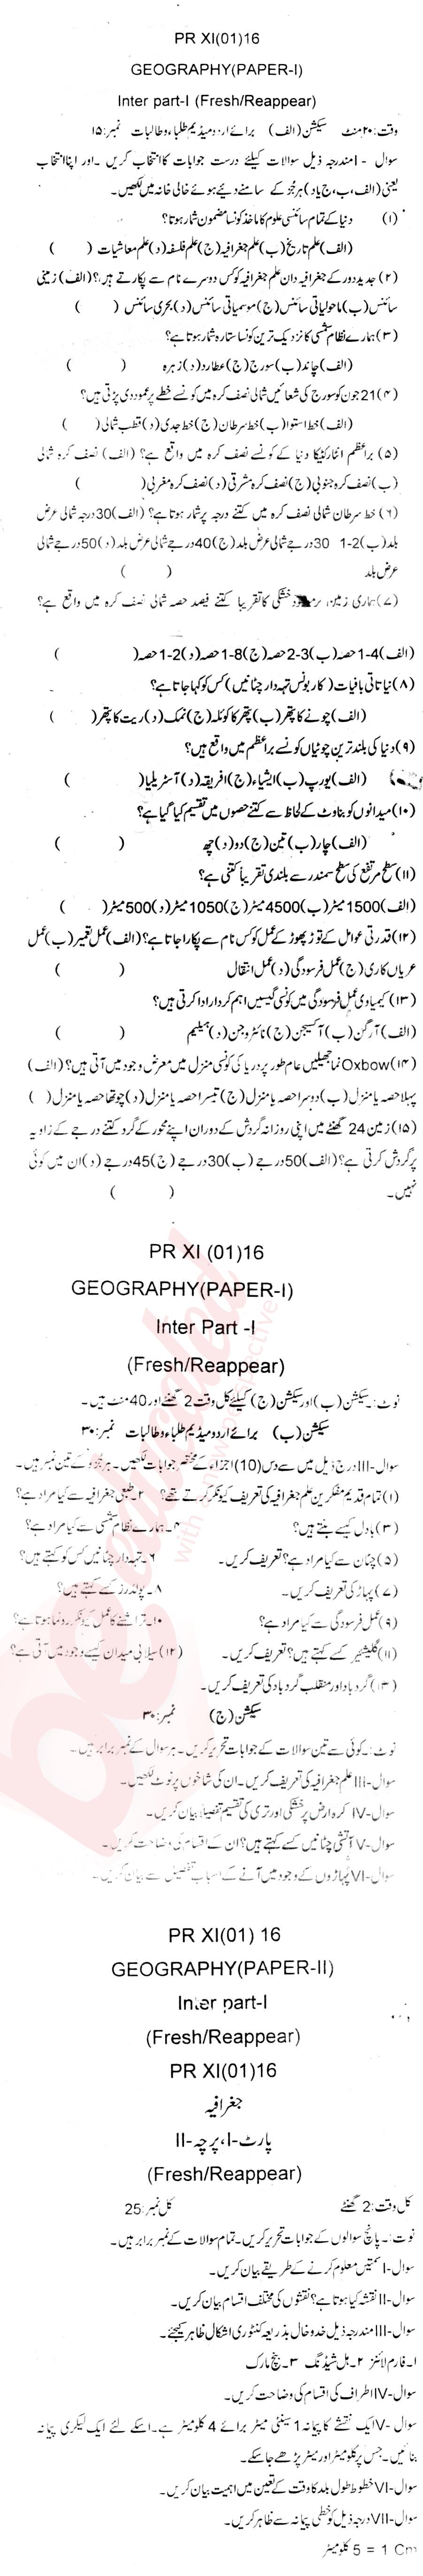 Commercial Geography FA Part 1 Past Paper Group 1 BISE Swat 2016